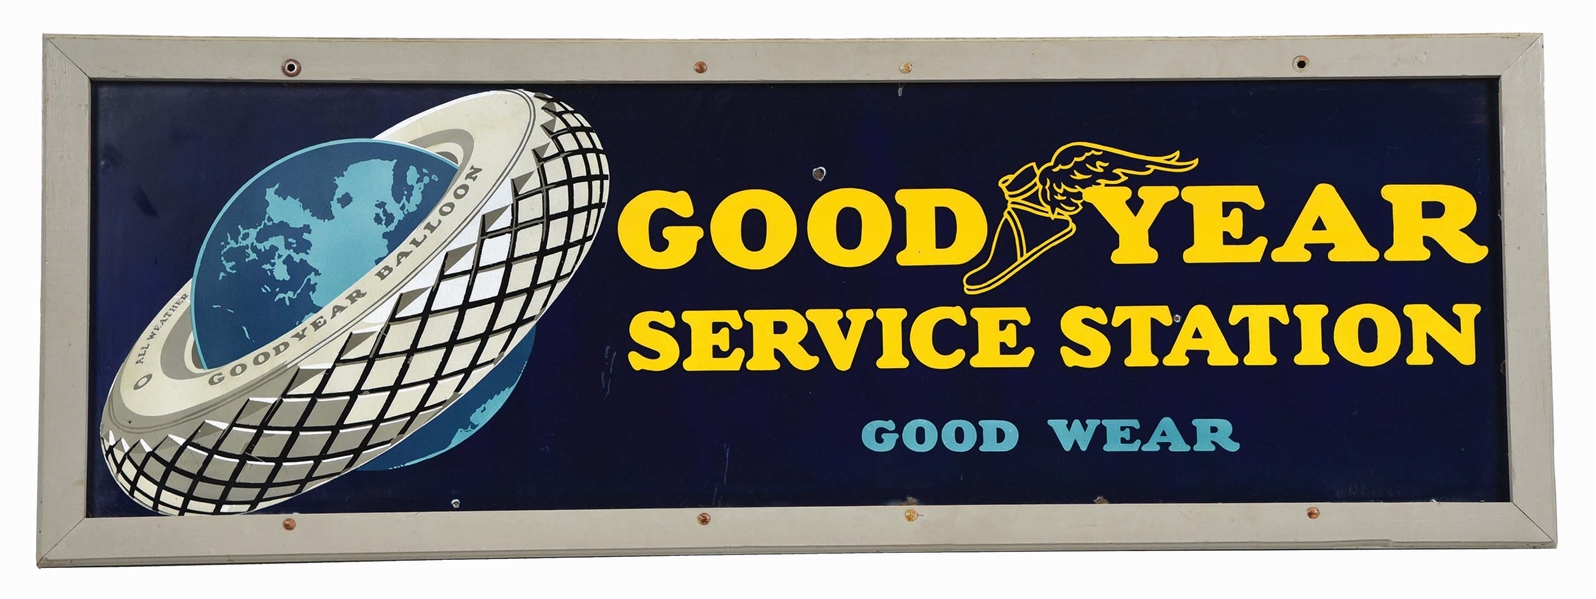 GOODYEAR SERVICE STATION PORCELAIN SIGN W/ TIRE & GLOBE GRAPHIC AND ADDED WOOD FRAME. 